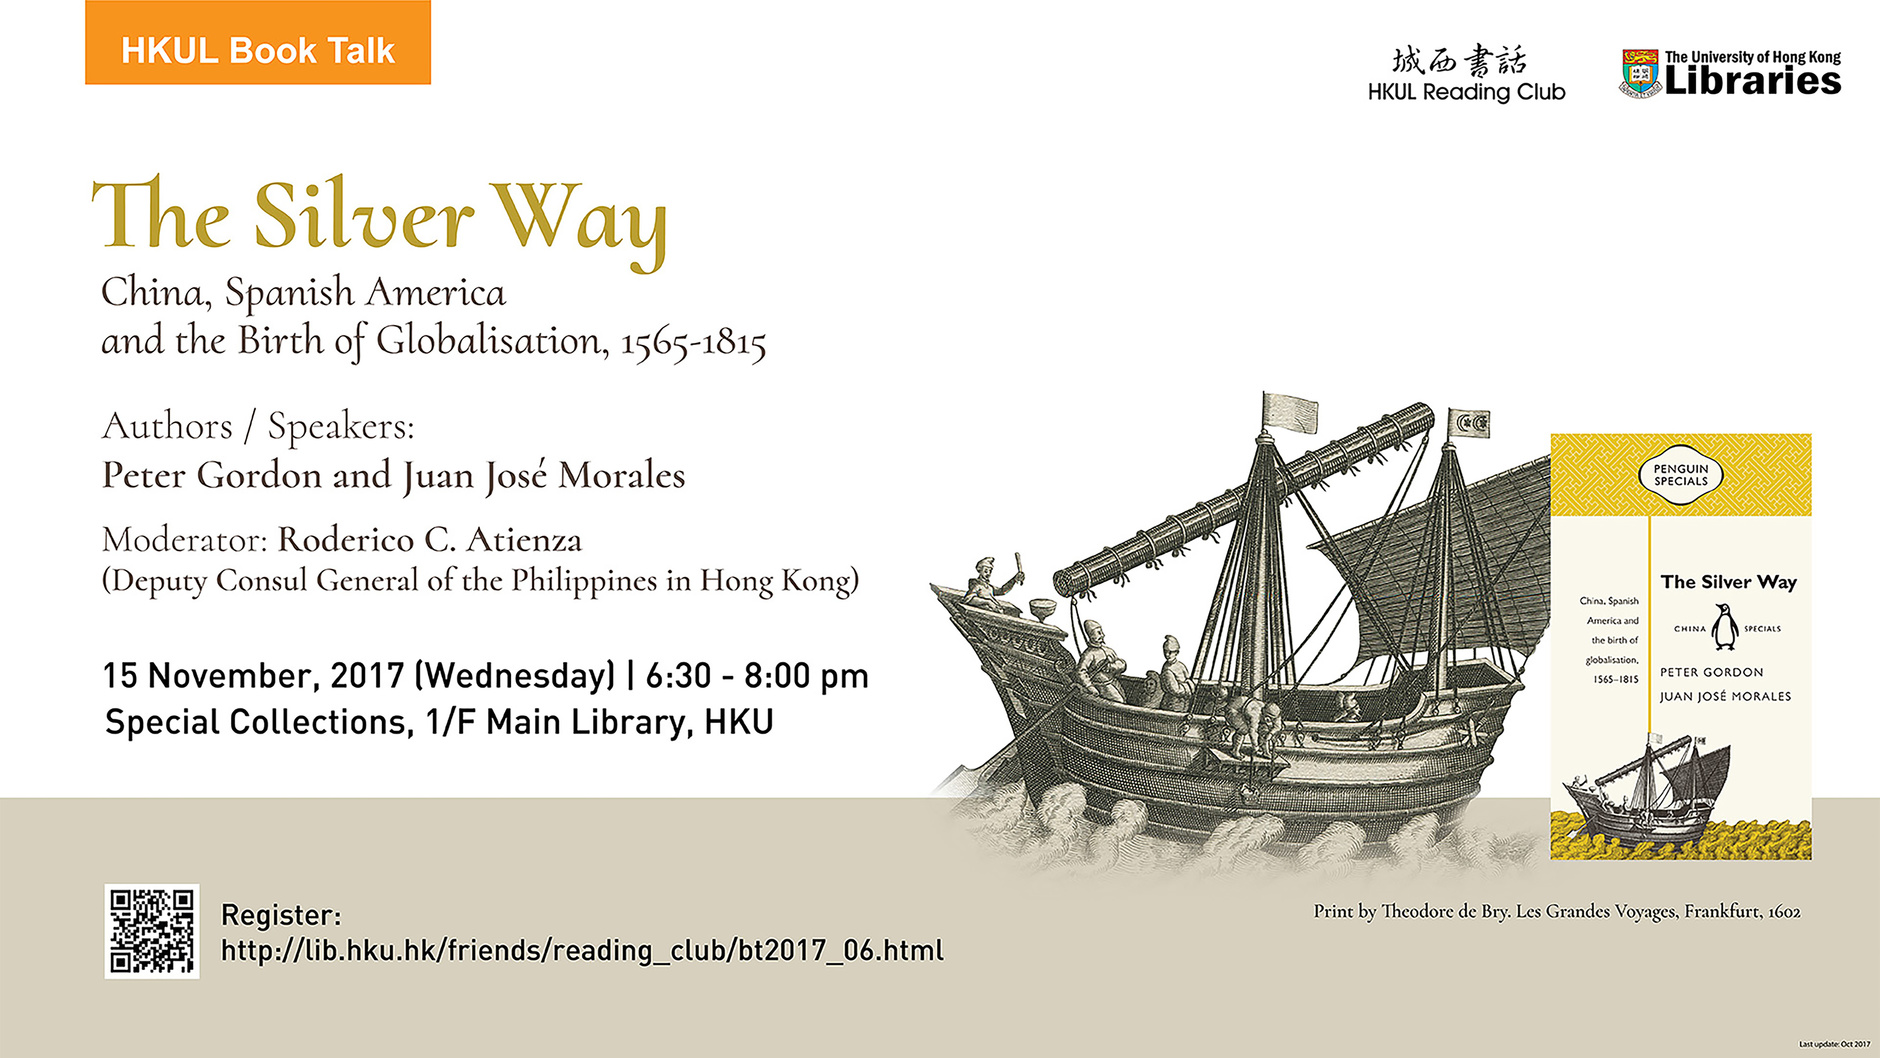 Book Talk: The Silver Way: China, Spanish America and the Birth of Globalisation, 1565-1815